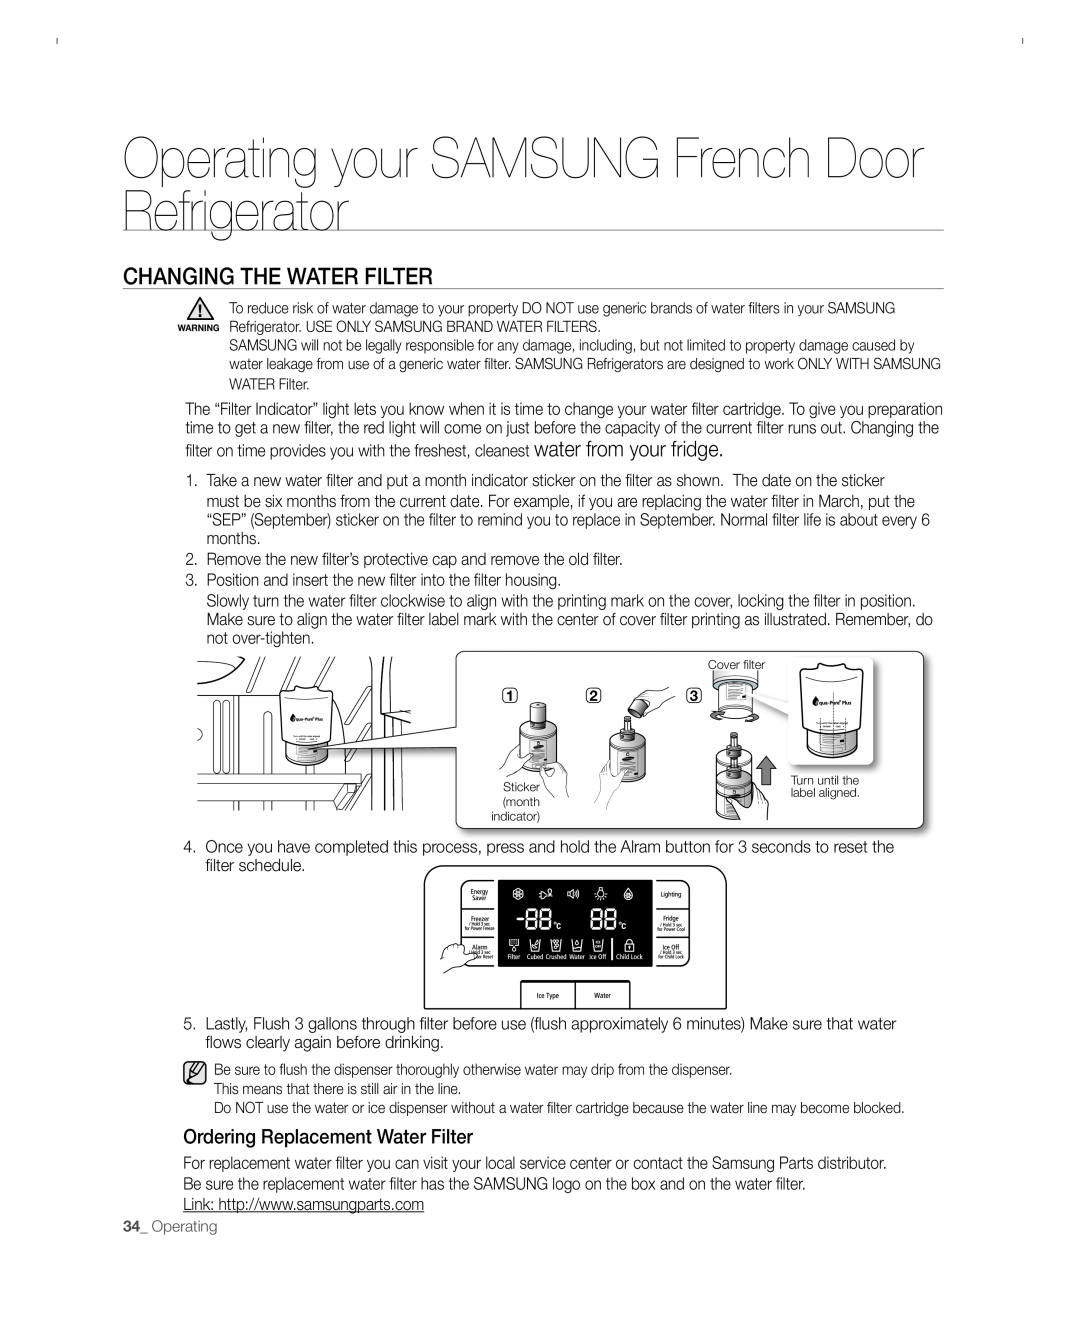 Samsung RFG297ACBP user manual CHAnGinG tHE wAtER FiLtER, Operating your SAMSUNG French Door Refrigerator 